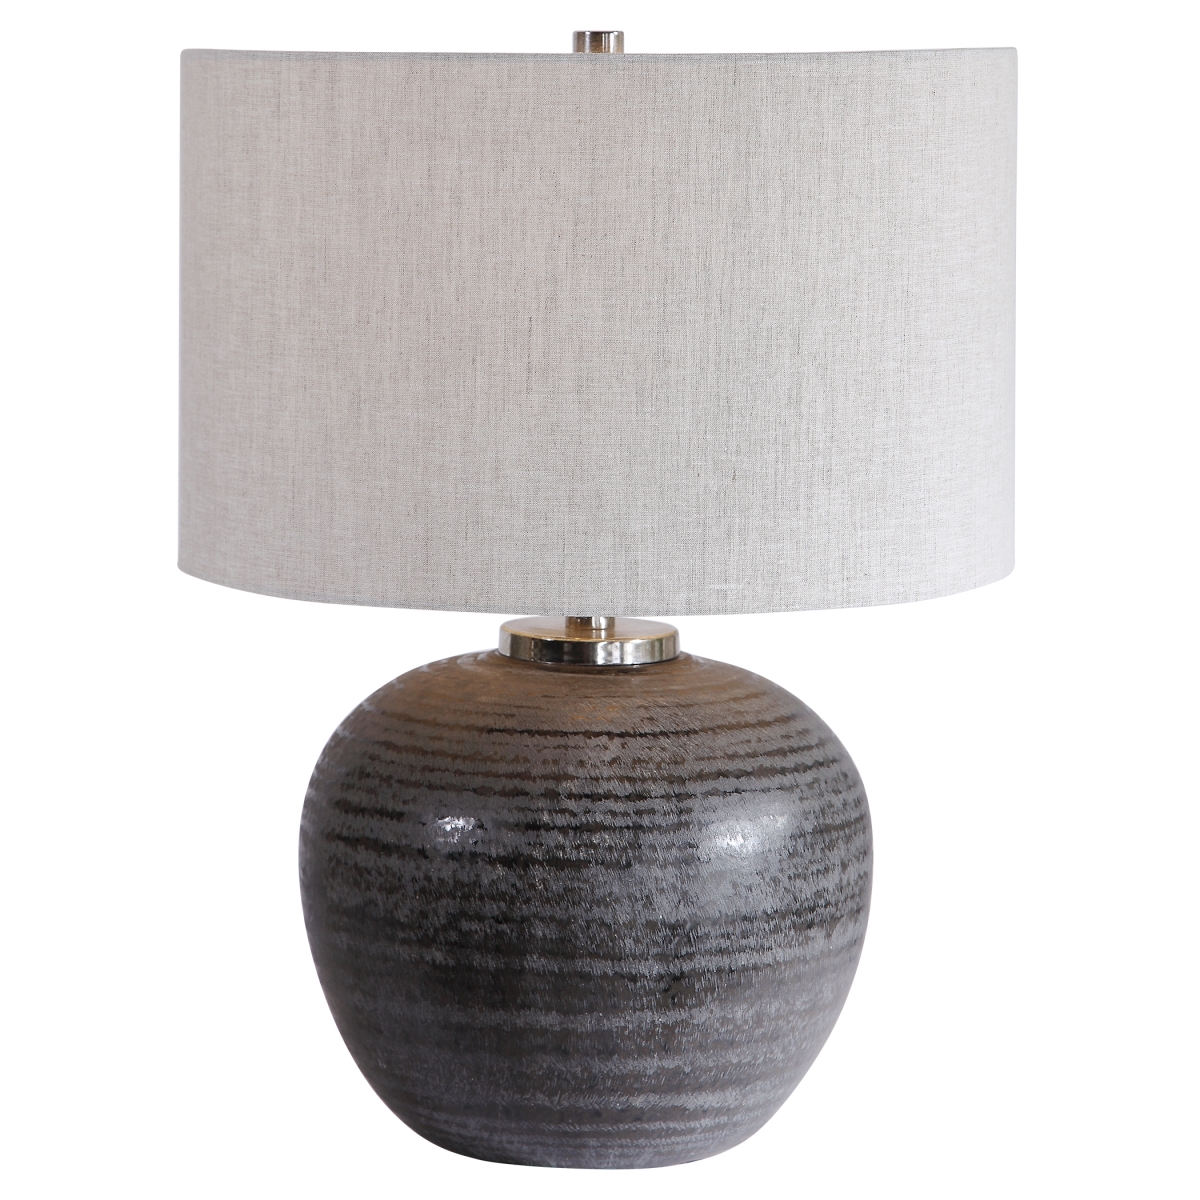 Picture of 212 Main 26349-1 Mikkel Charcoal Table Lamp